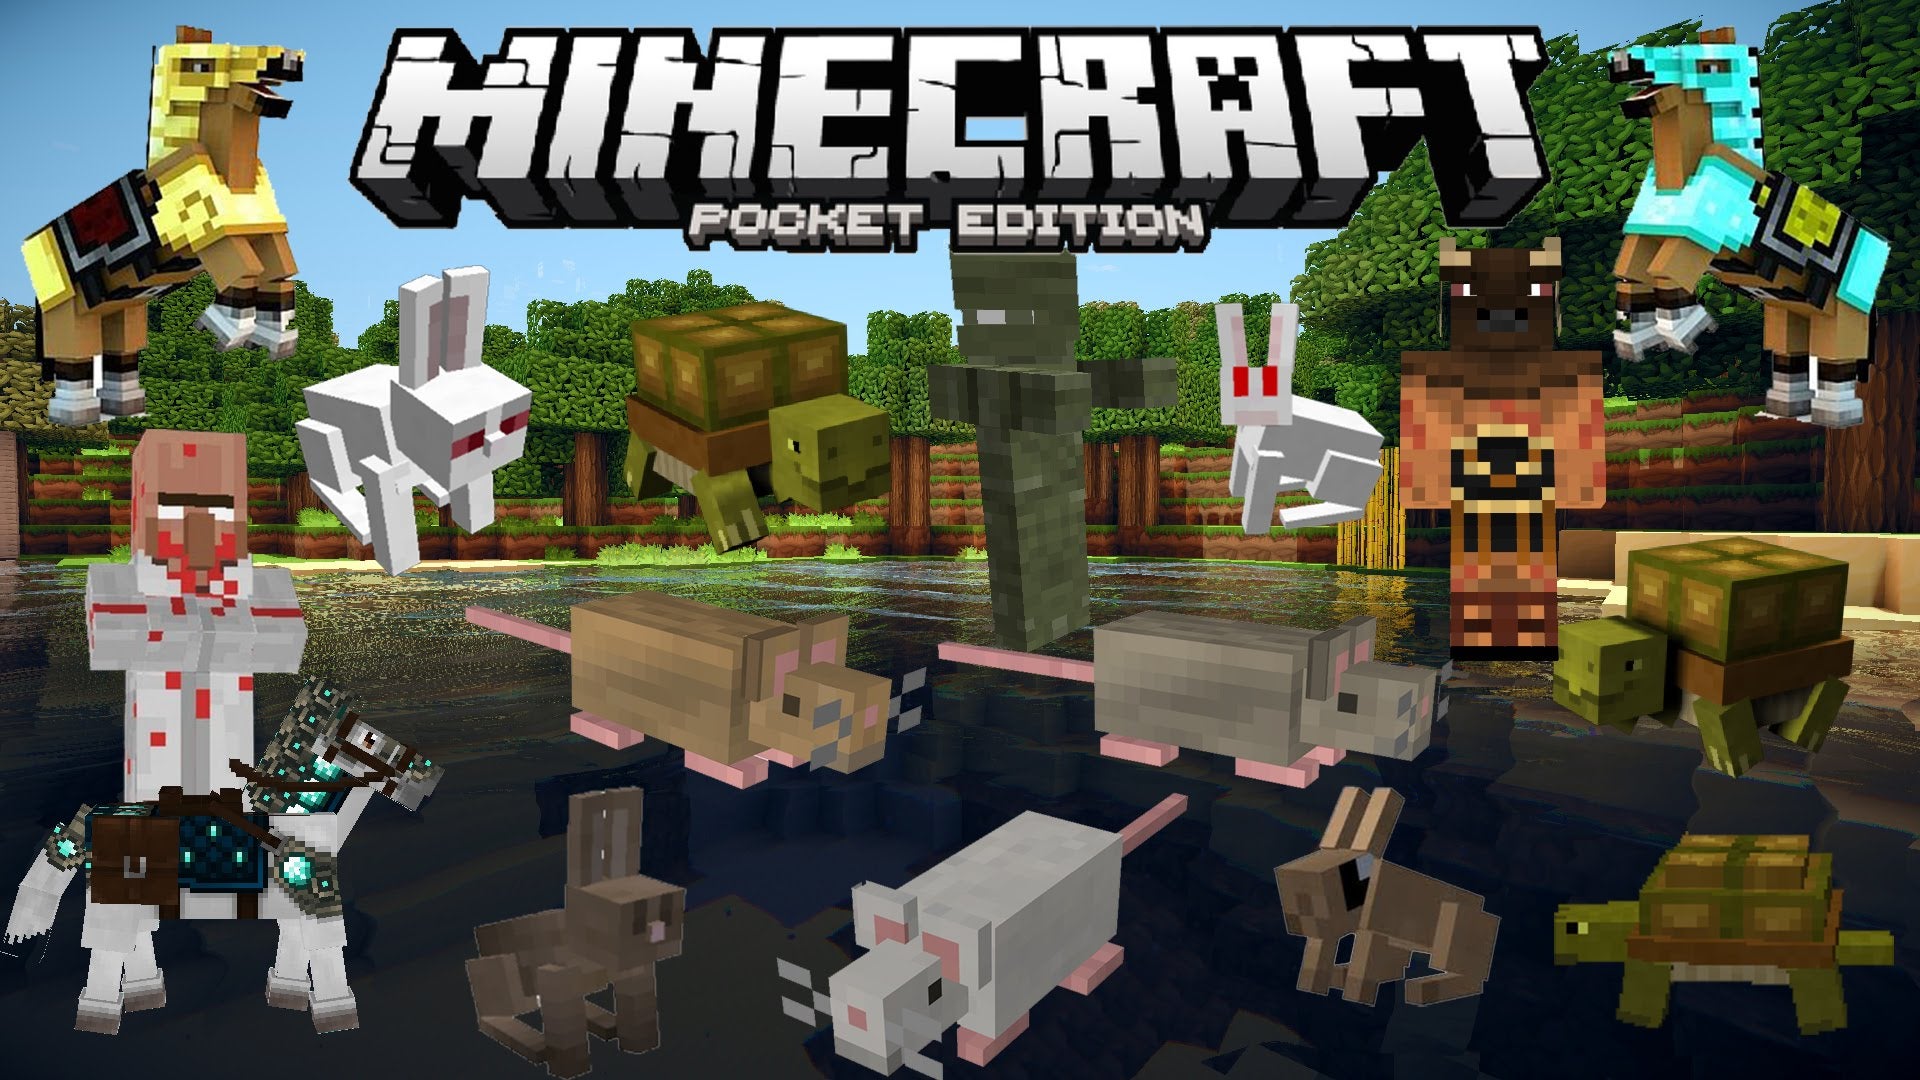 Minecraft Pocket Edition add-ons have been infecting Android